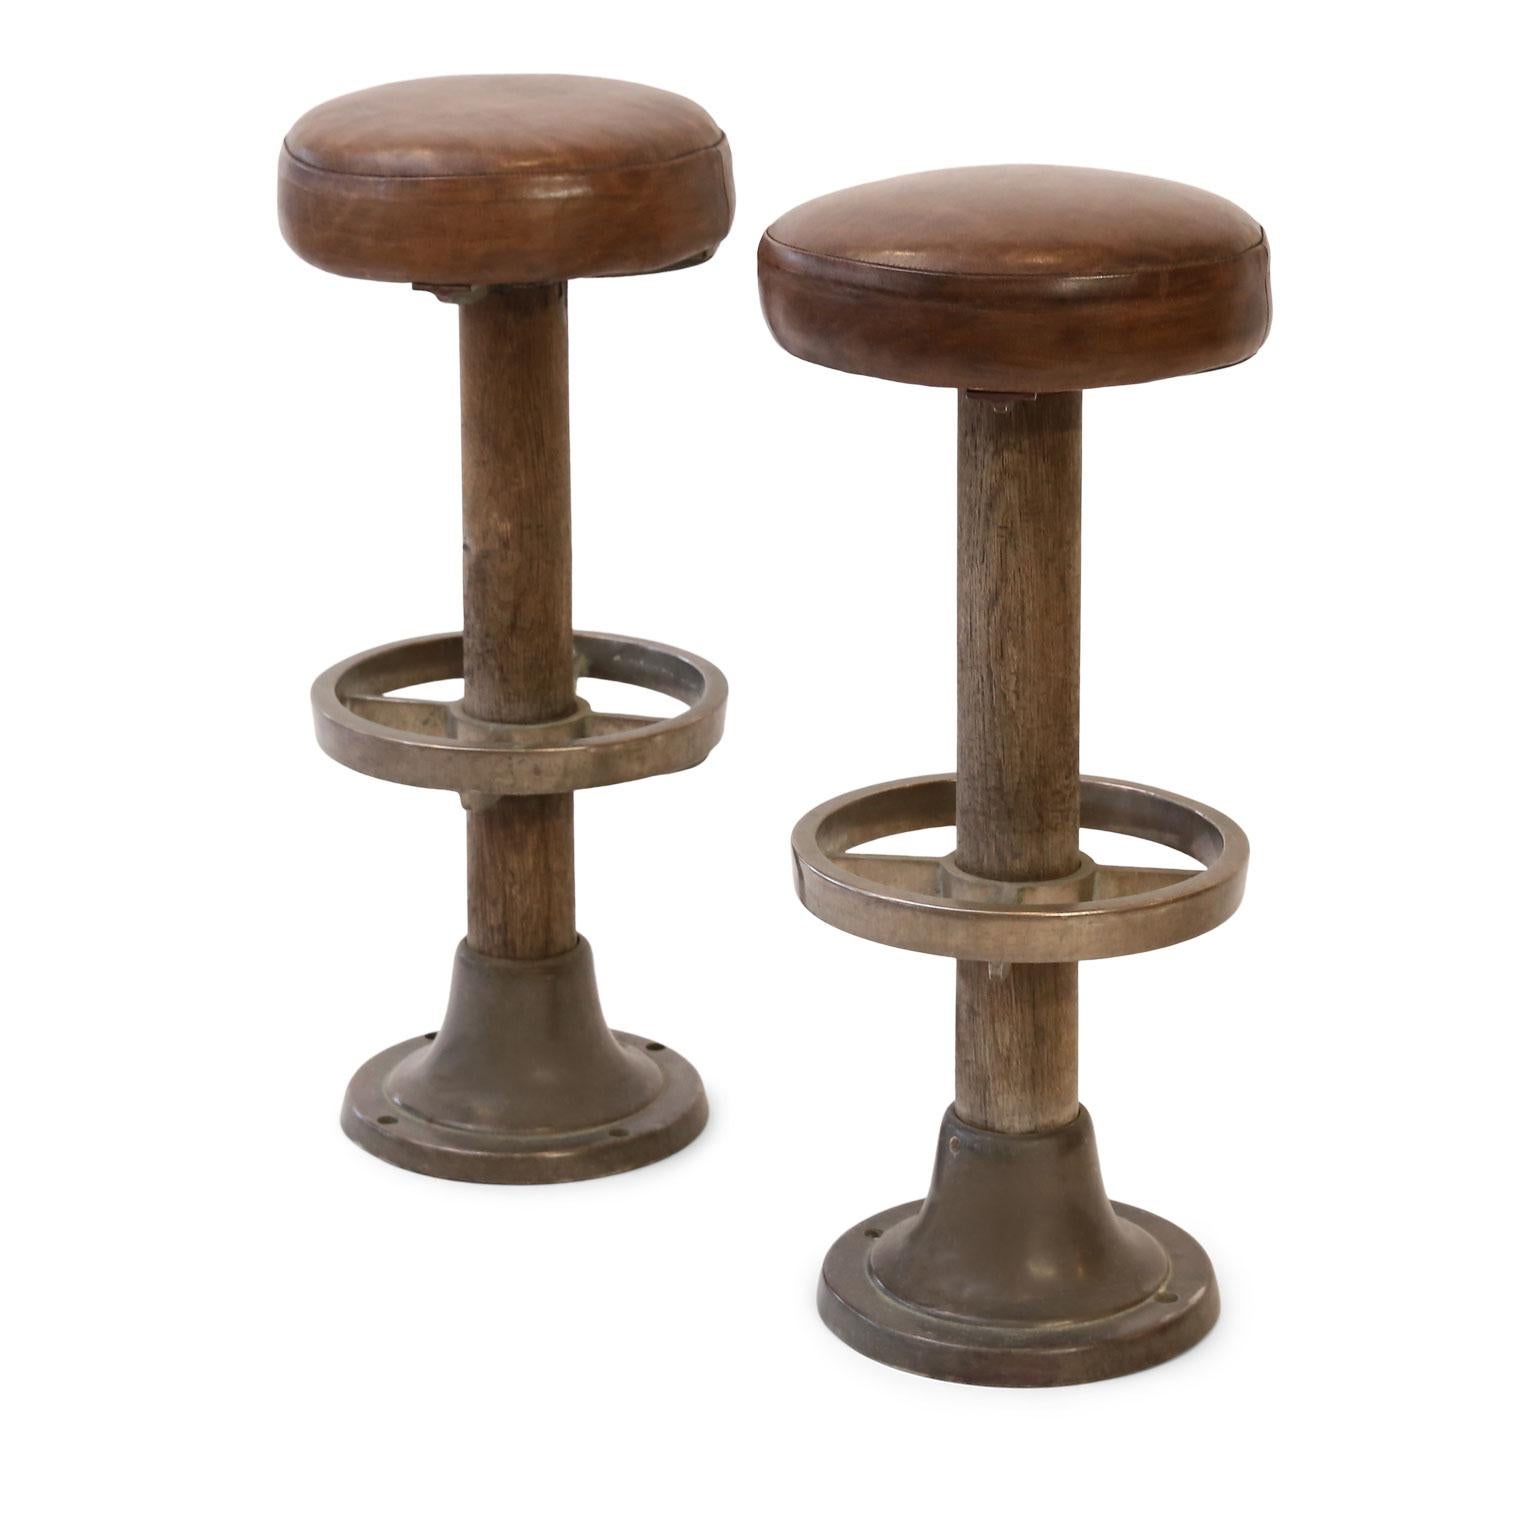 Pair of Leather-Covered Barstools 3